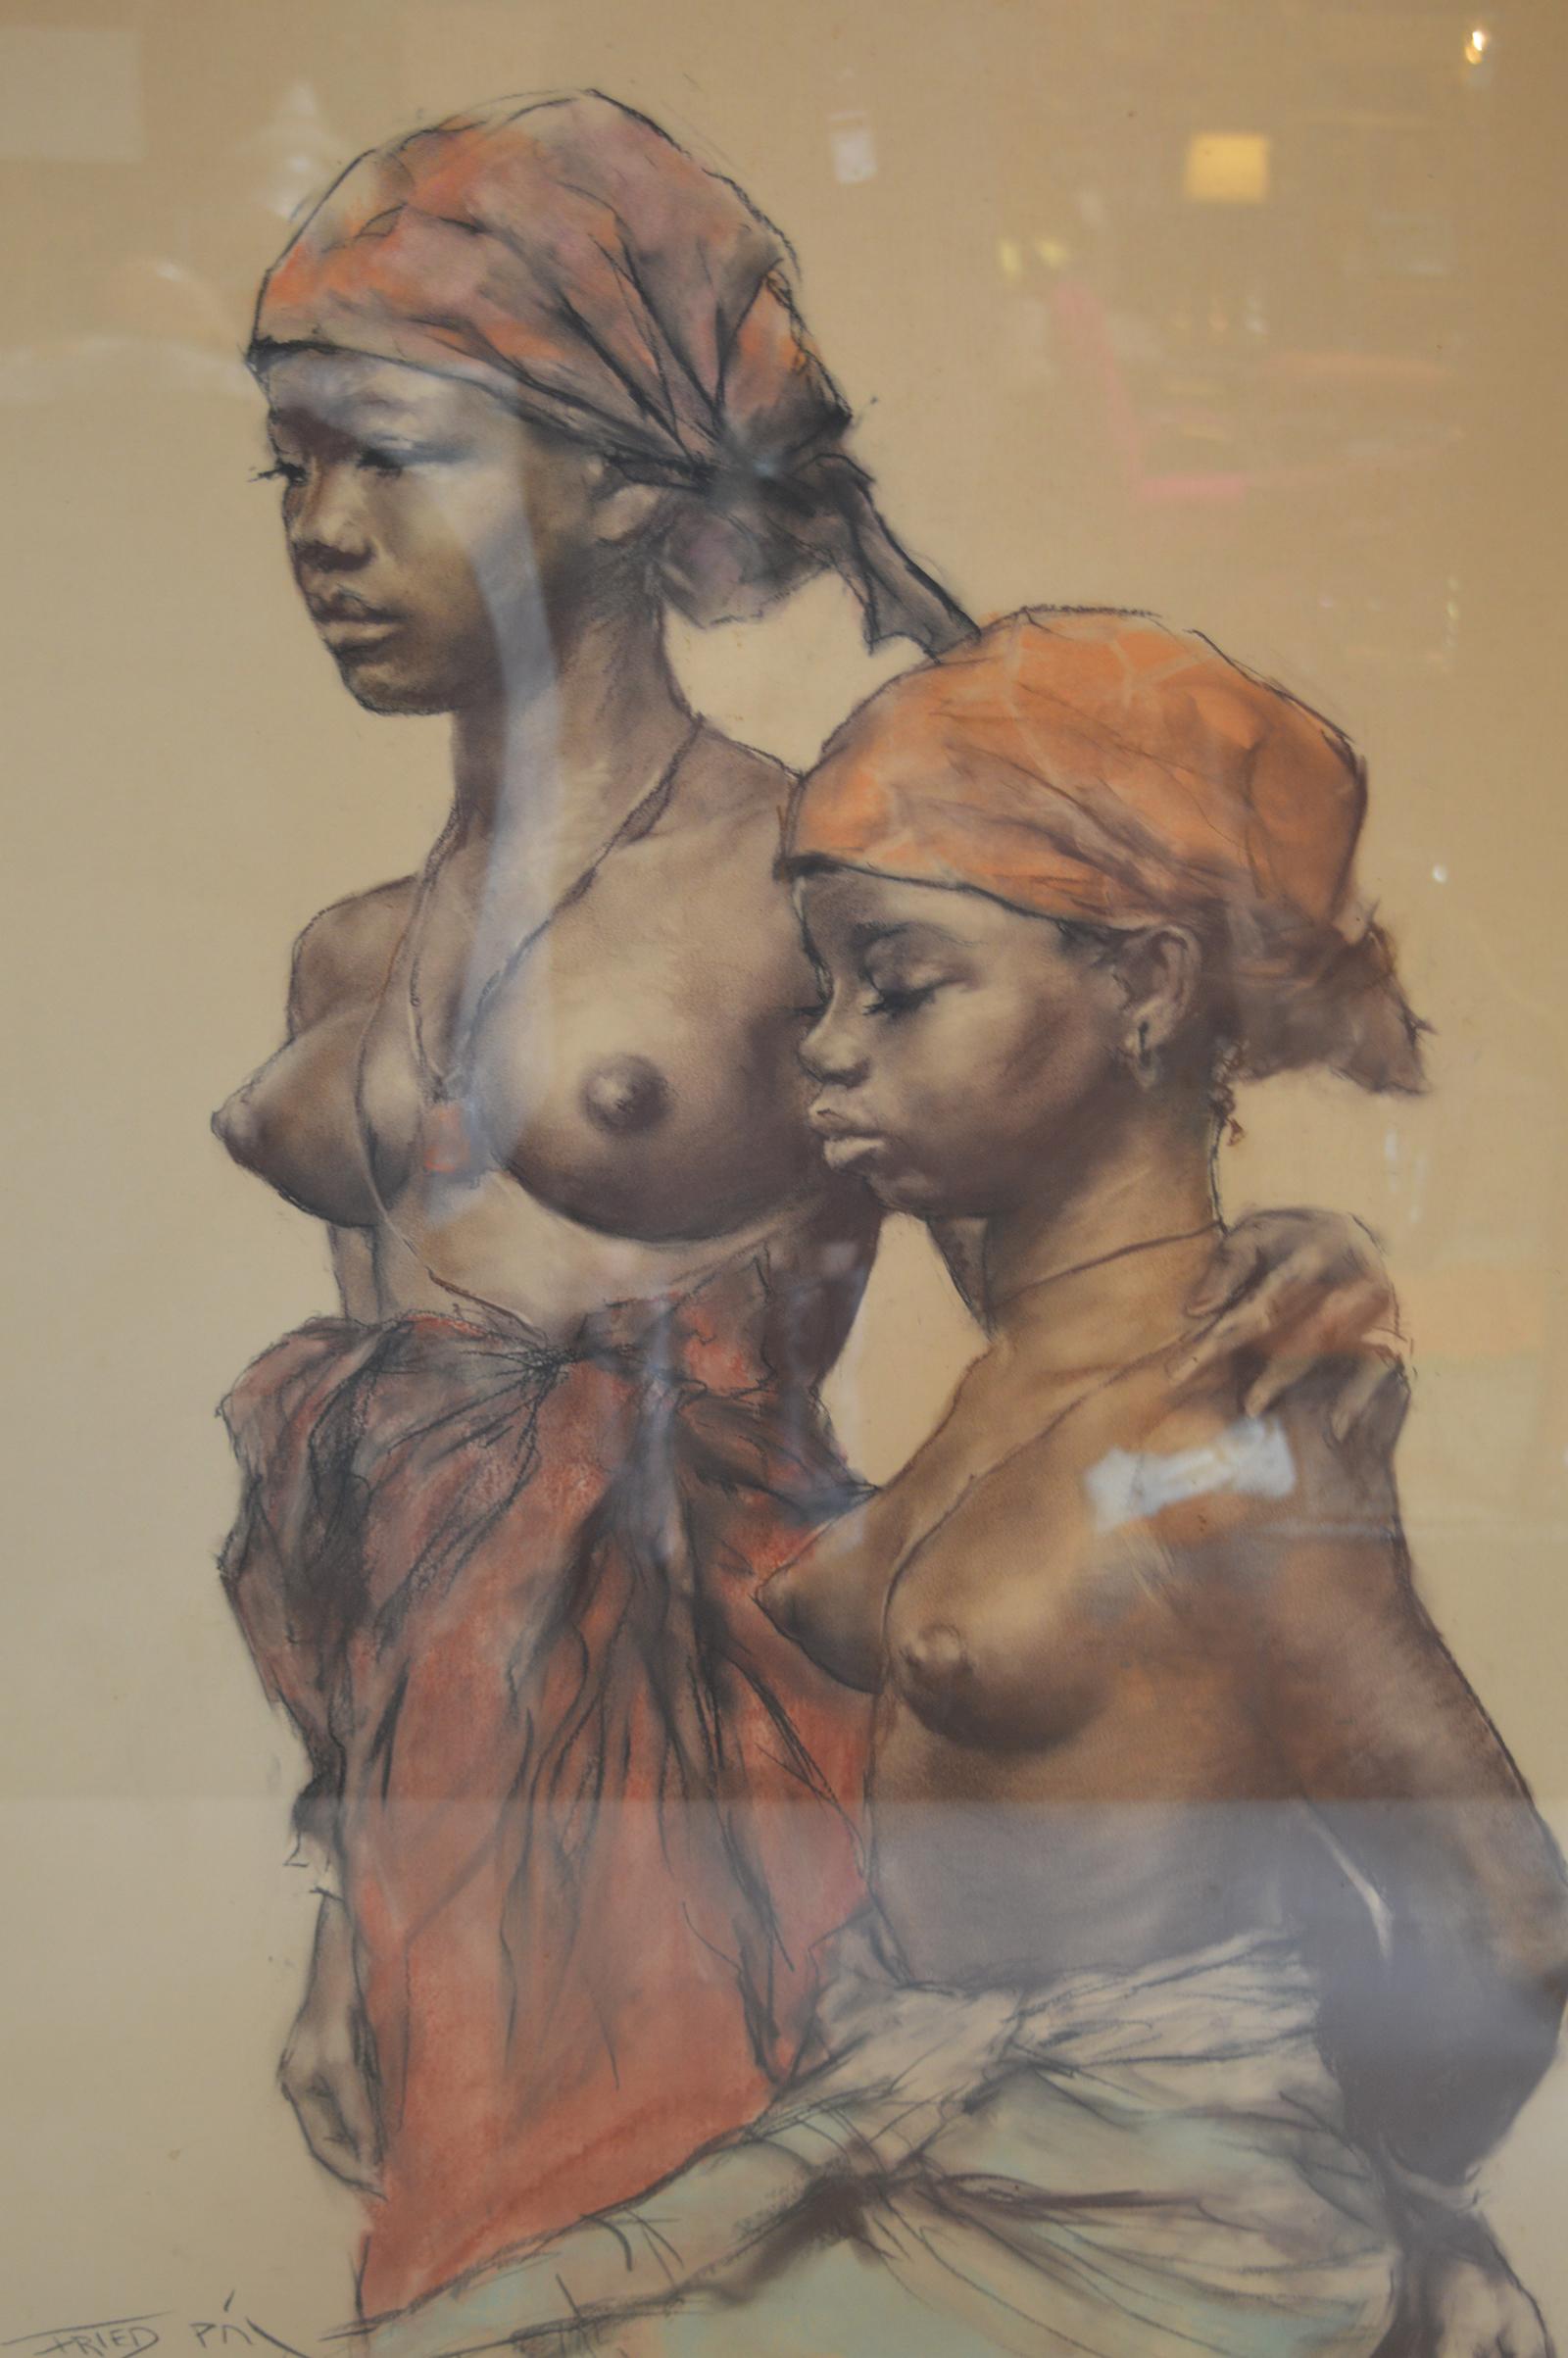 American Two African Woman, Pastel on Paper by Pal Fried